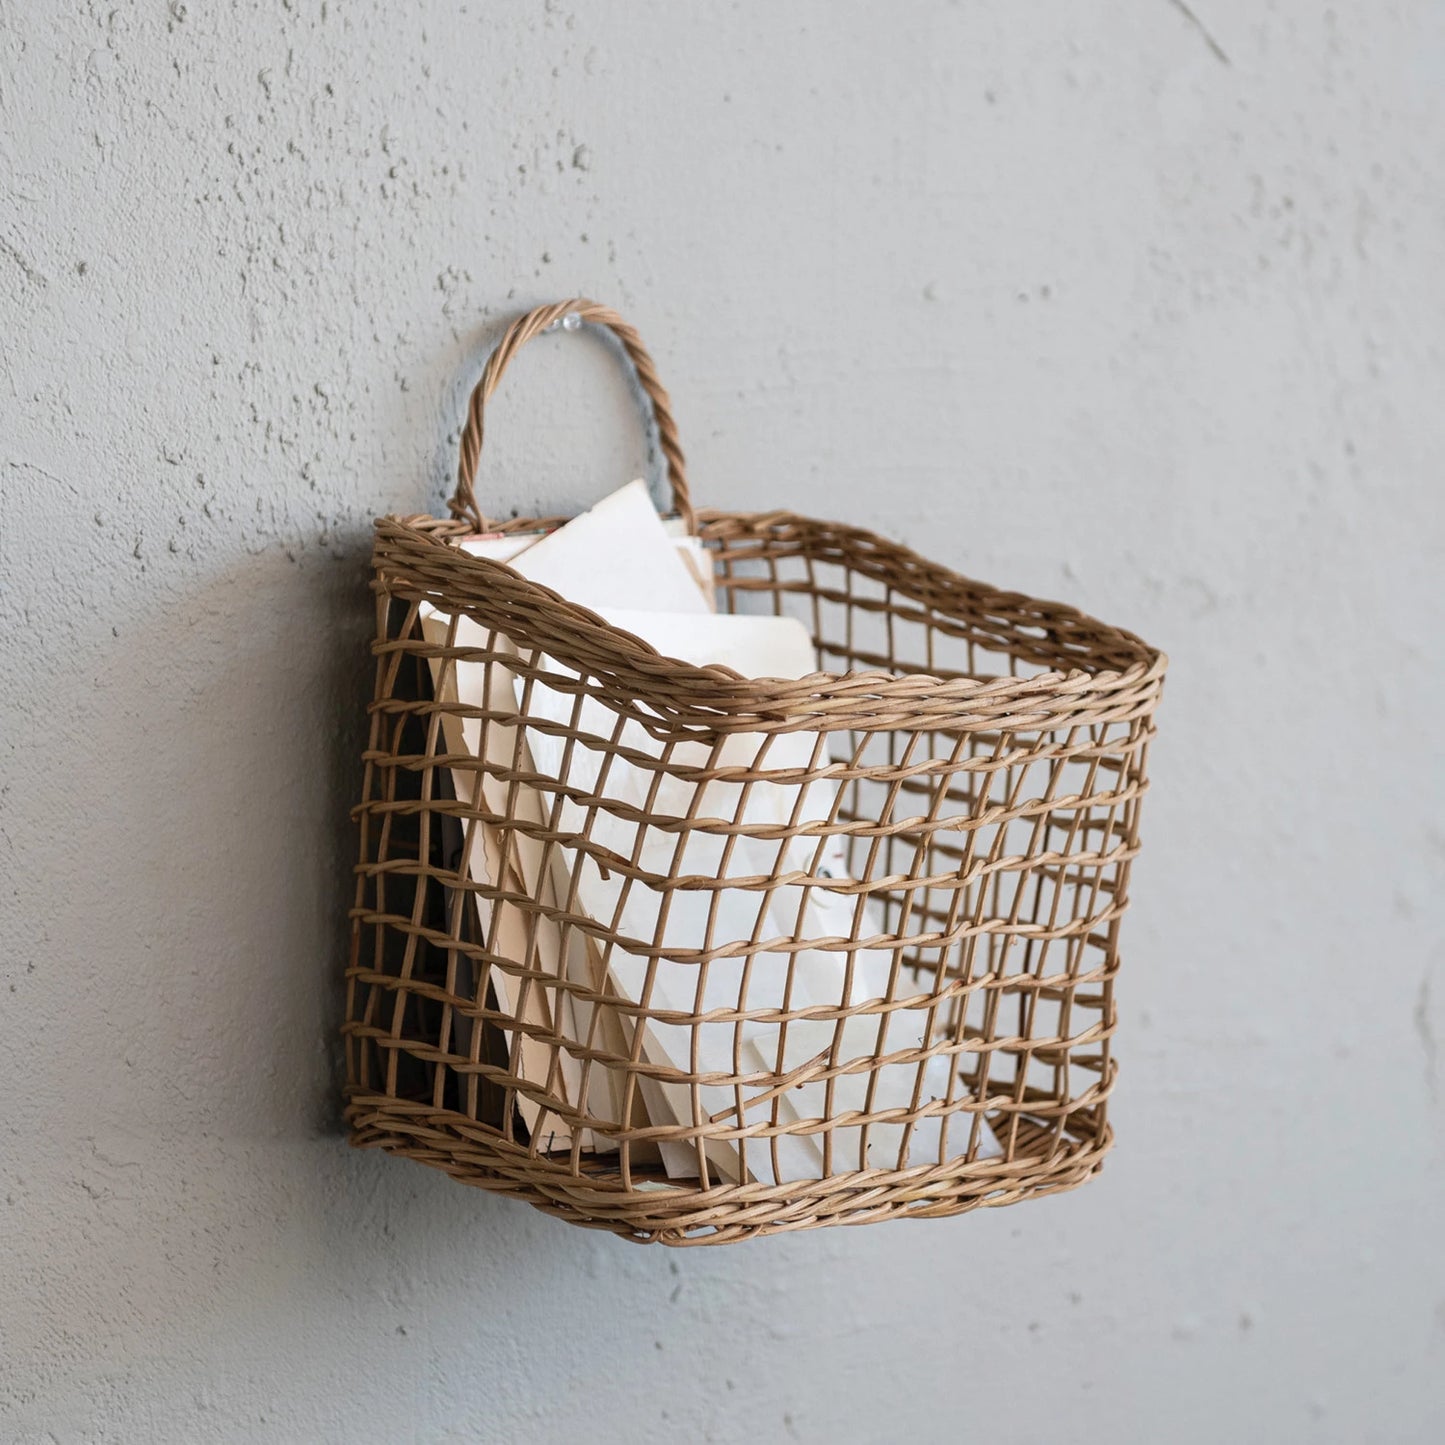 Seagrass Wall Basket